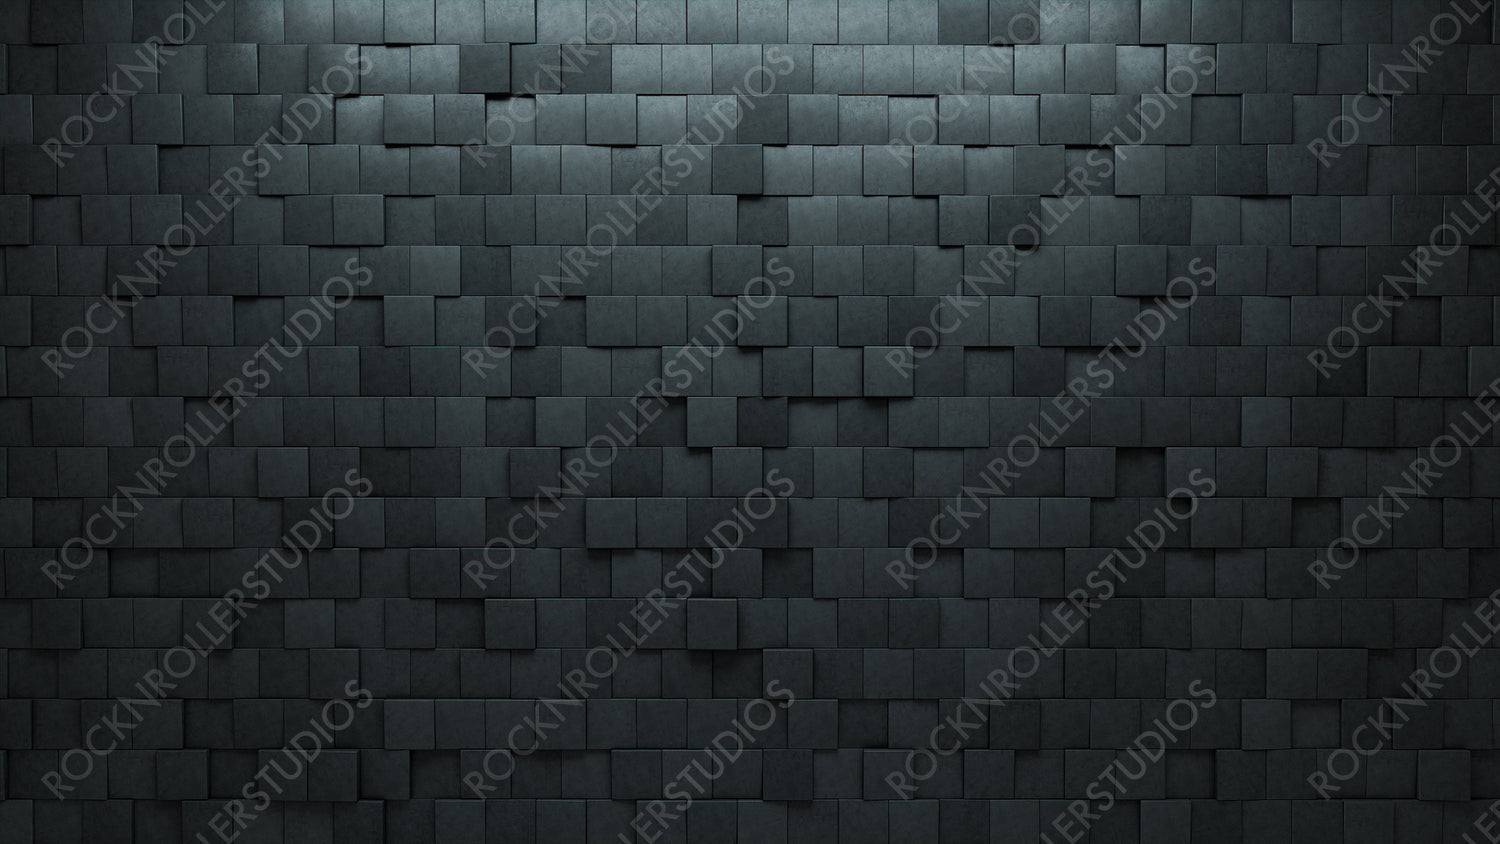 Futuristic Tiles arranged to create a Square wall. Semigloss, 3D Background formed from Concrete blocks. 3D Render